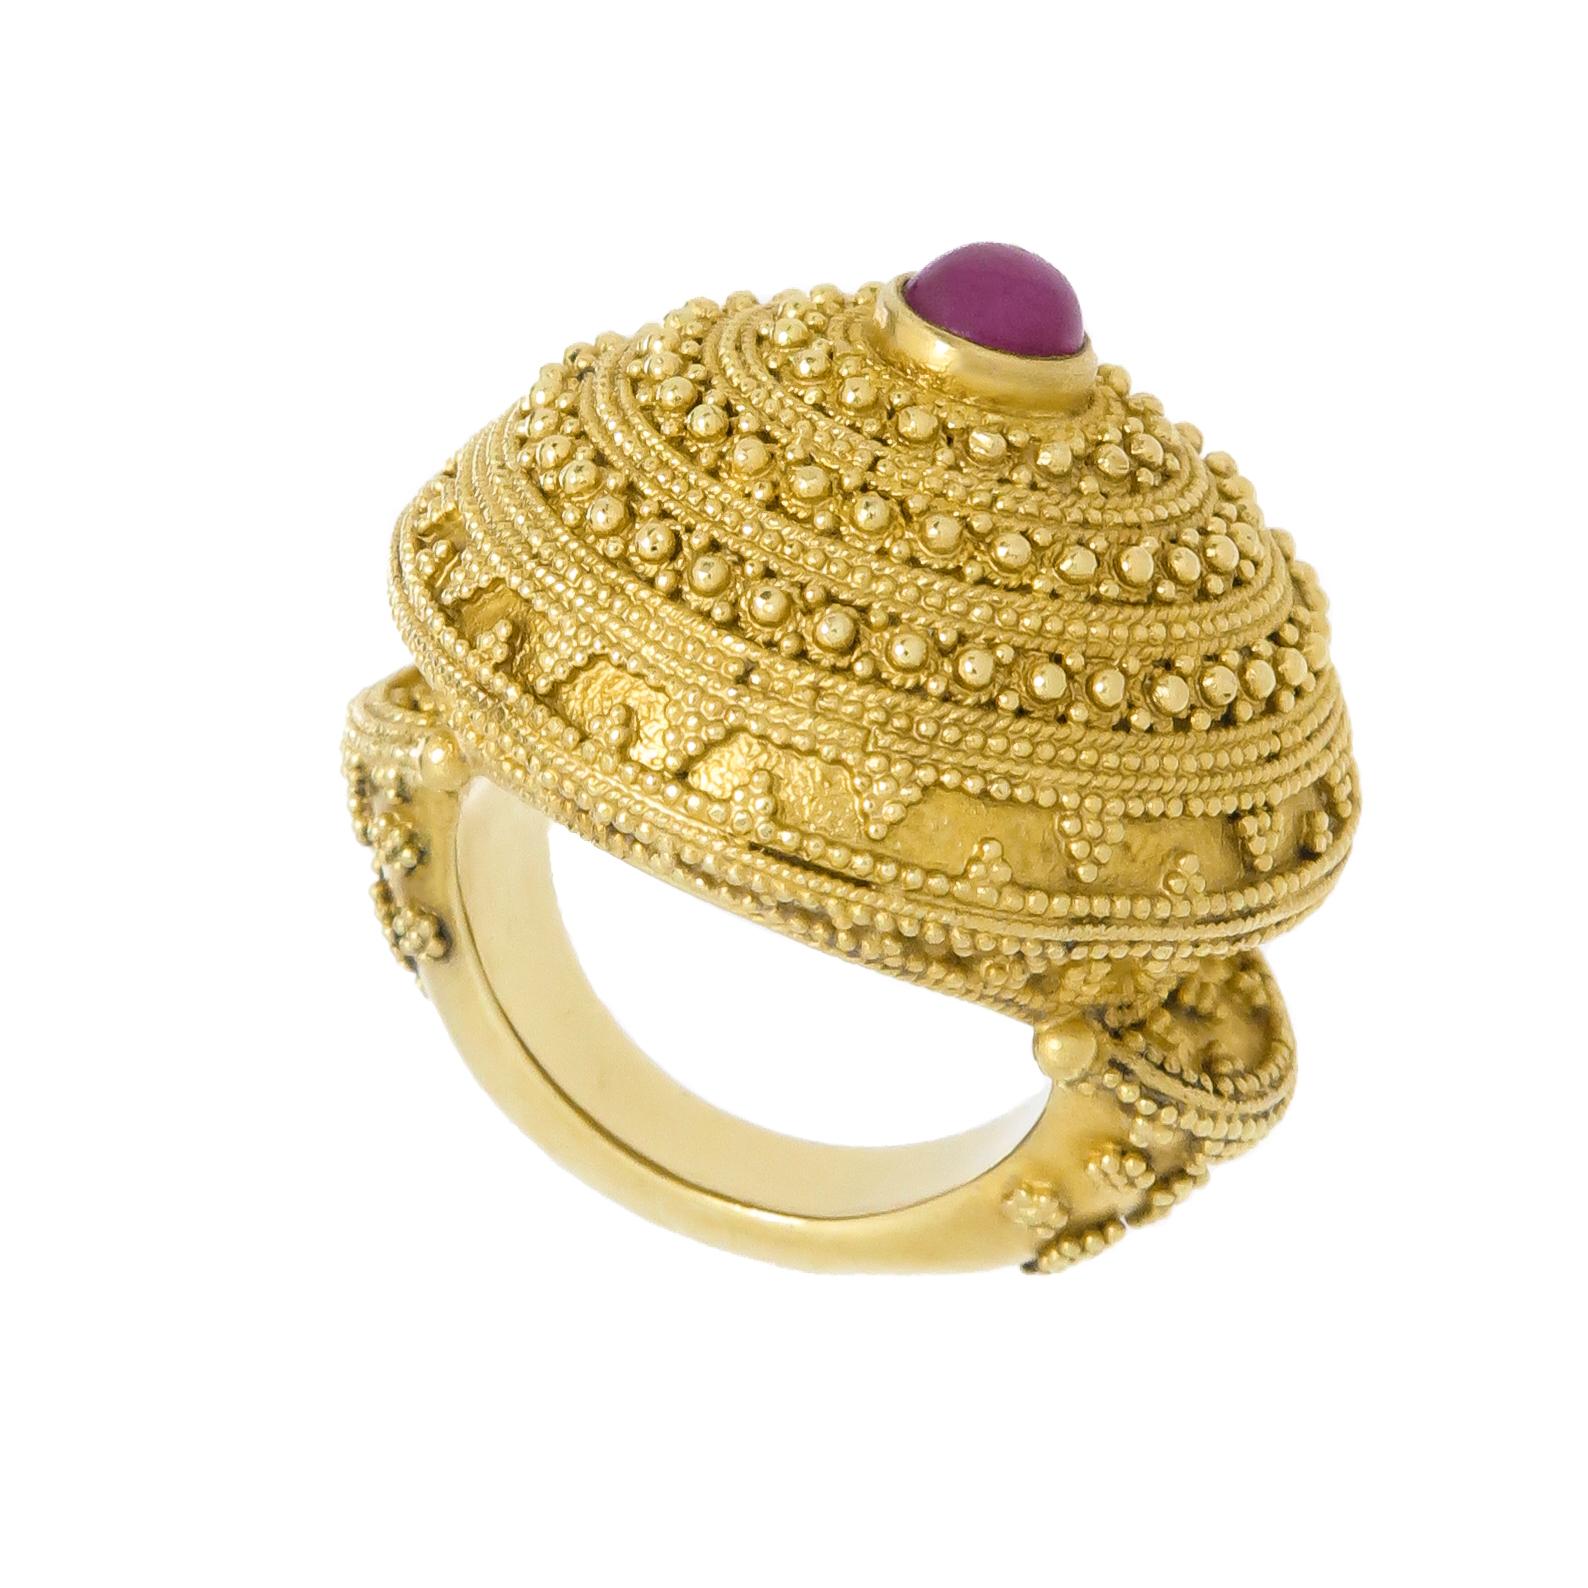 Circa 2000 Illias Lalaounis 18K Yellow Gold Dome Ring, the ring top measures 1 1/4 inches in diameter and 1/2 inch in height. Very fine Gold Granulation work and centrally set with a Cabochon Ruby of approximately 1/2 carat. Finger size 4. Excellent